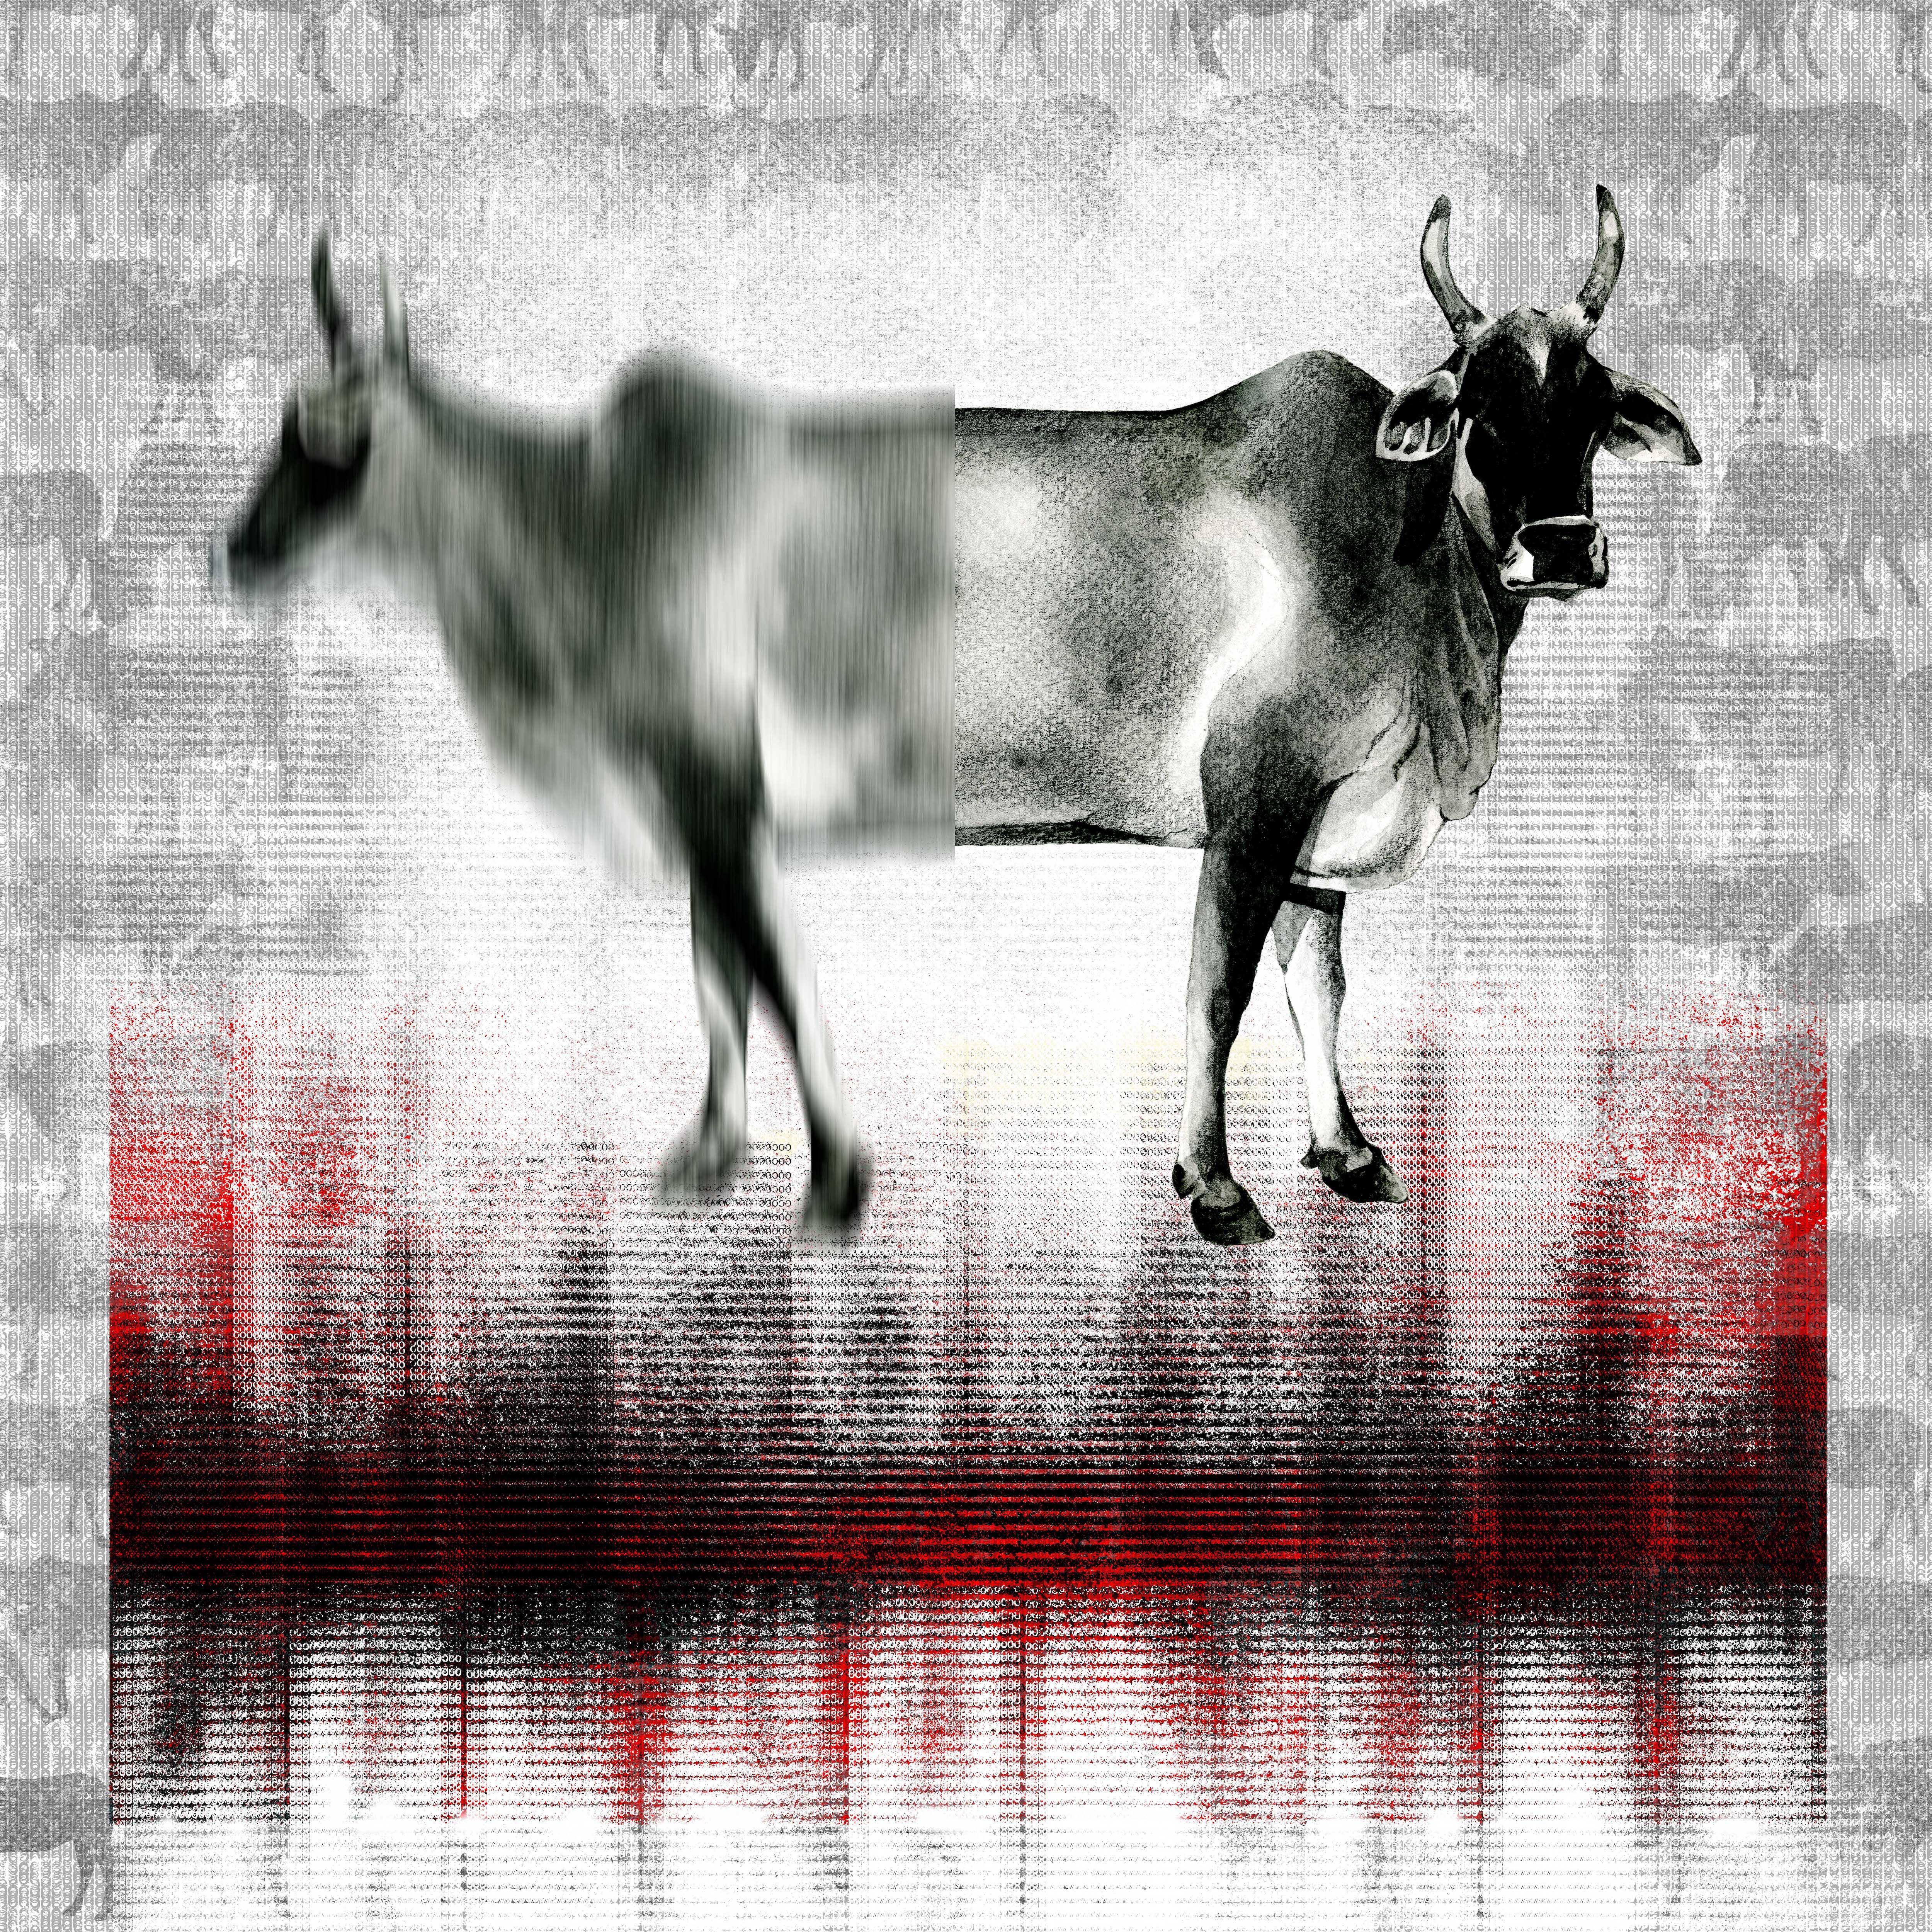 Binay Sinha Animal Print - The Holy Cow - Contemporary Digital Print on Paper Black + Red + Grey + White